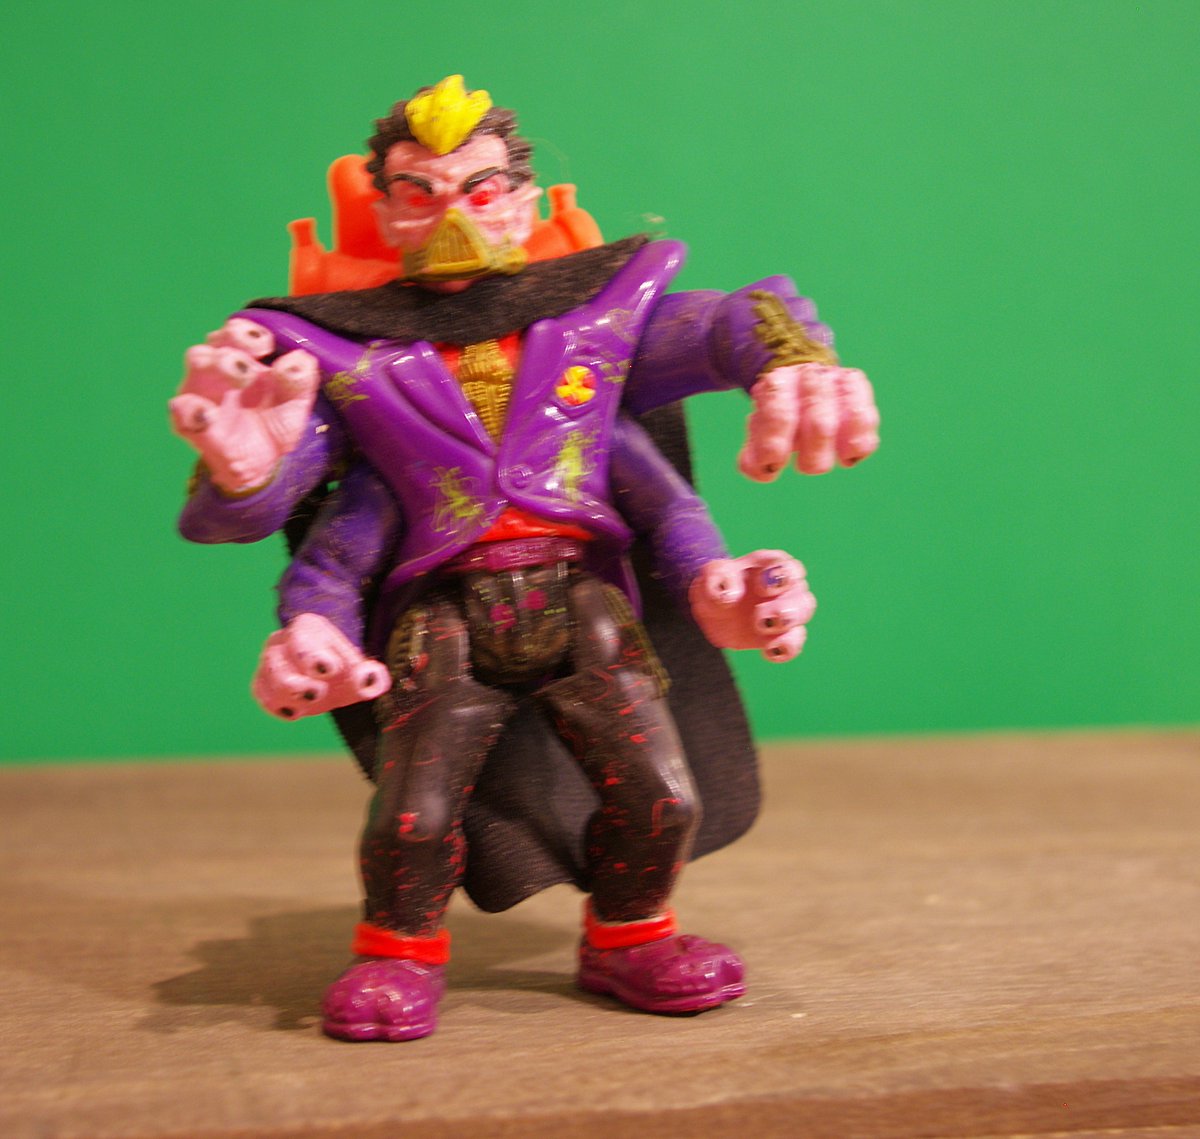 I'm not sure who decided to make a Troma flick in to a TMNT style childrens cartoon, but I'm glad they did, because it means that Playmates made some horrifically detailed gloopy toxie toys. I love them.